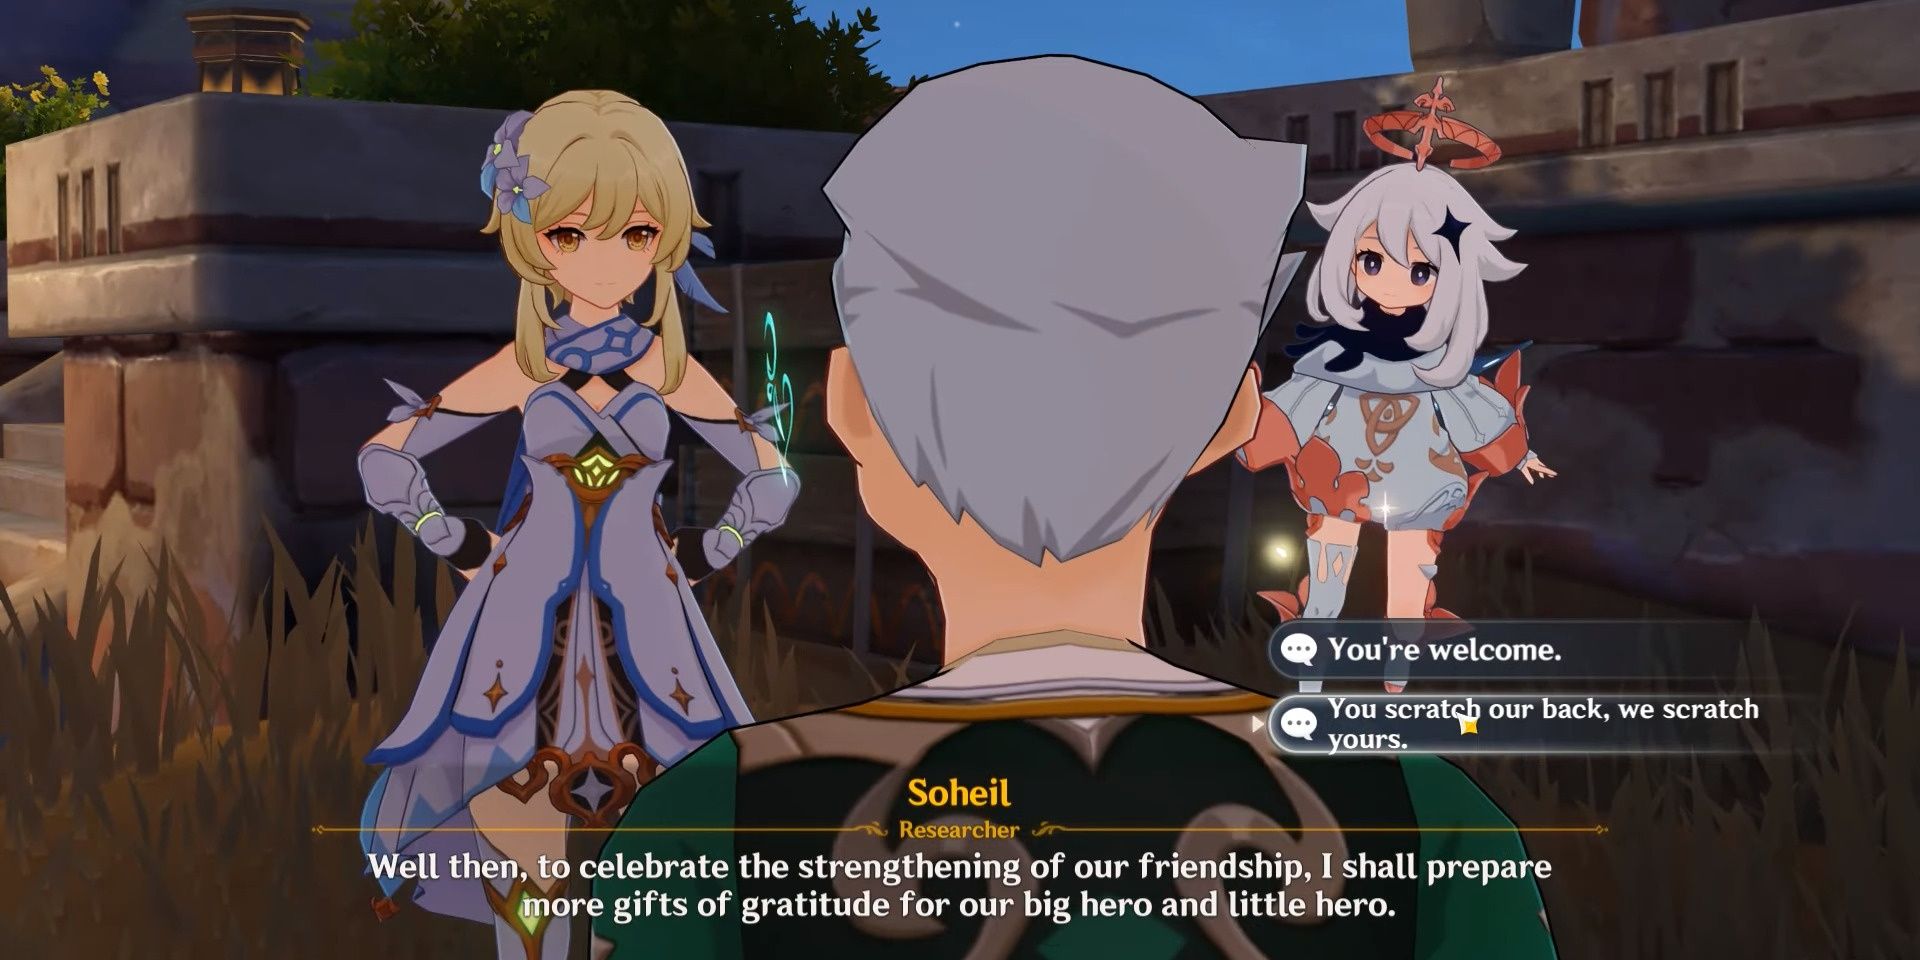 Image of the last conversation with Soheil for the Soheil's Wish quest in Genshin Impact.